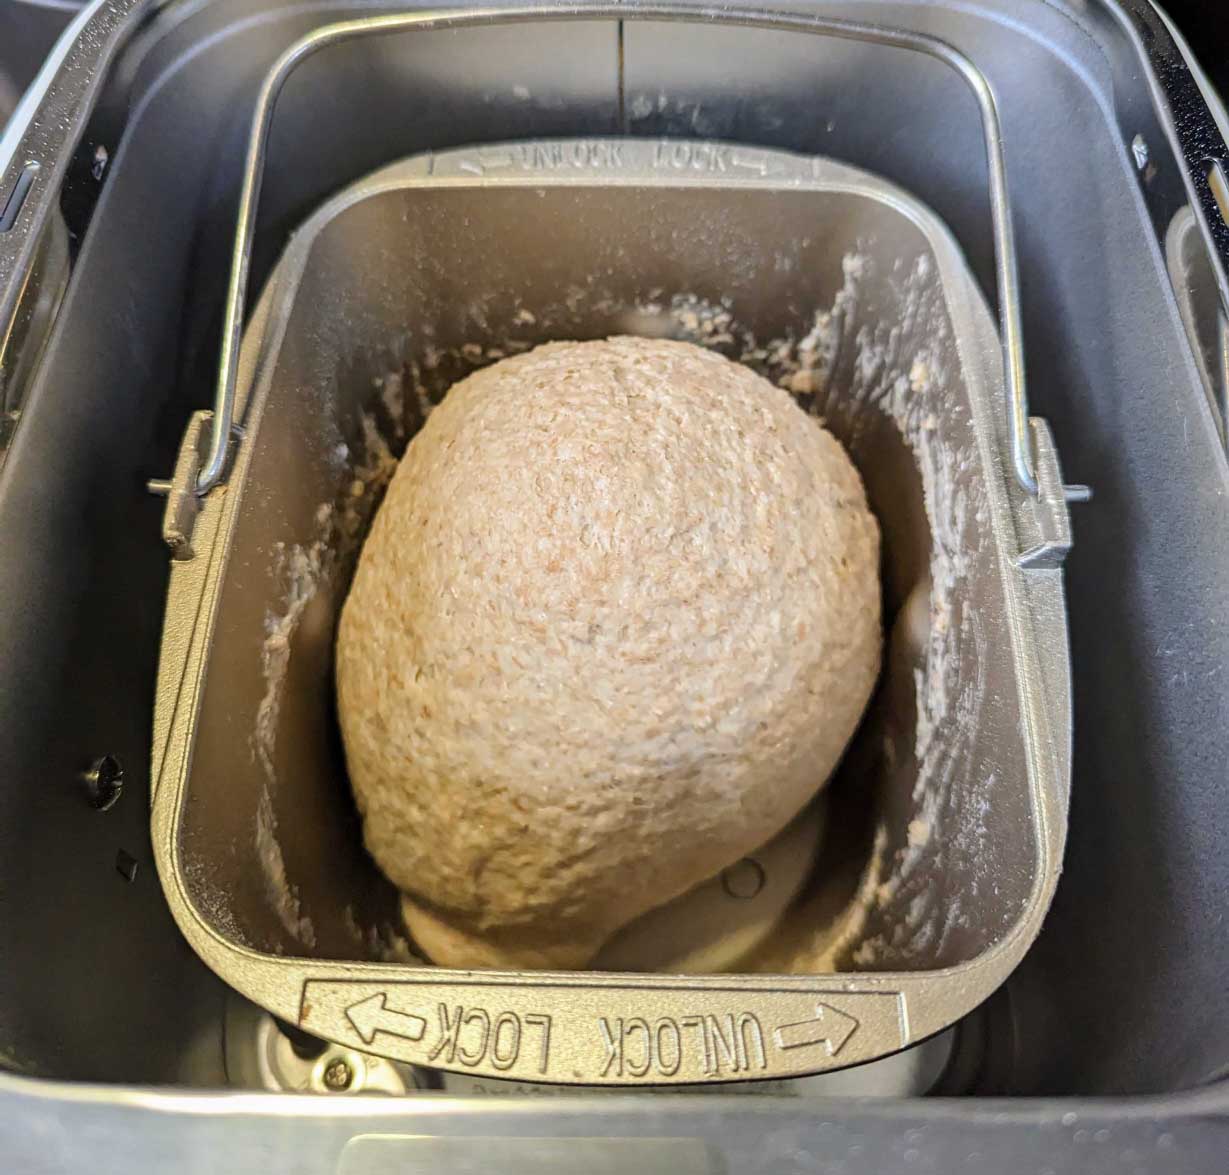 Smooth Ball of Wholemeal Sourdough kneading in Bread Machine